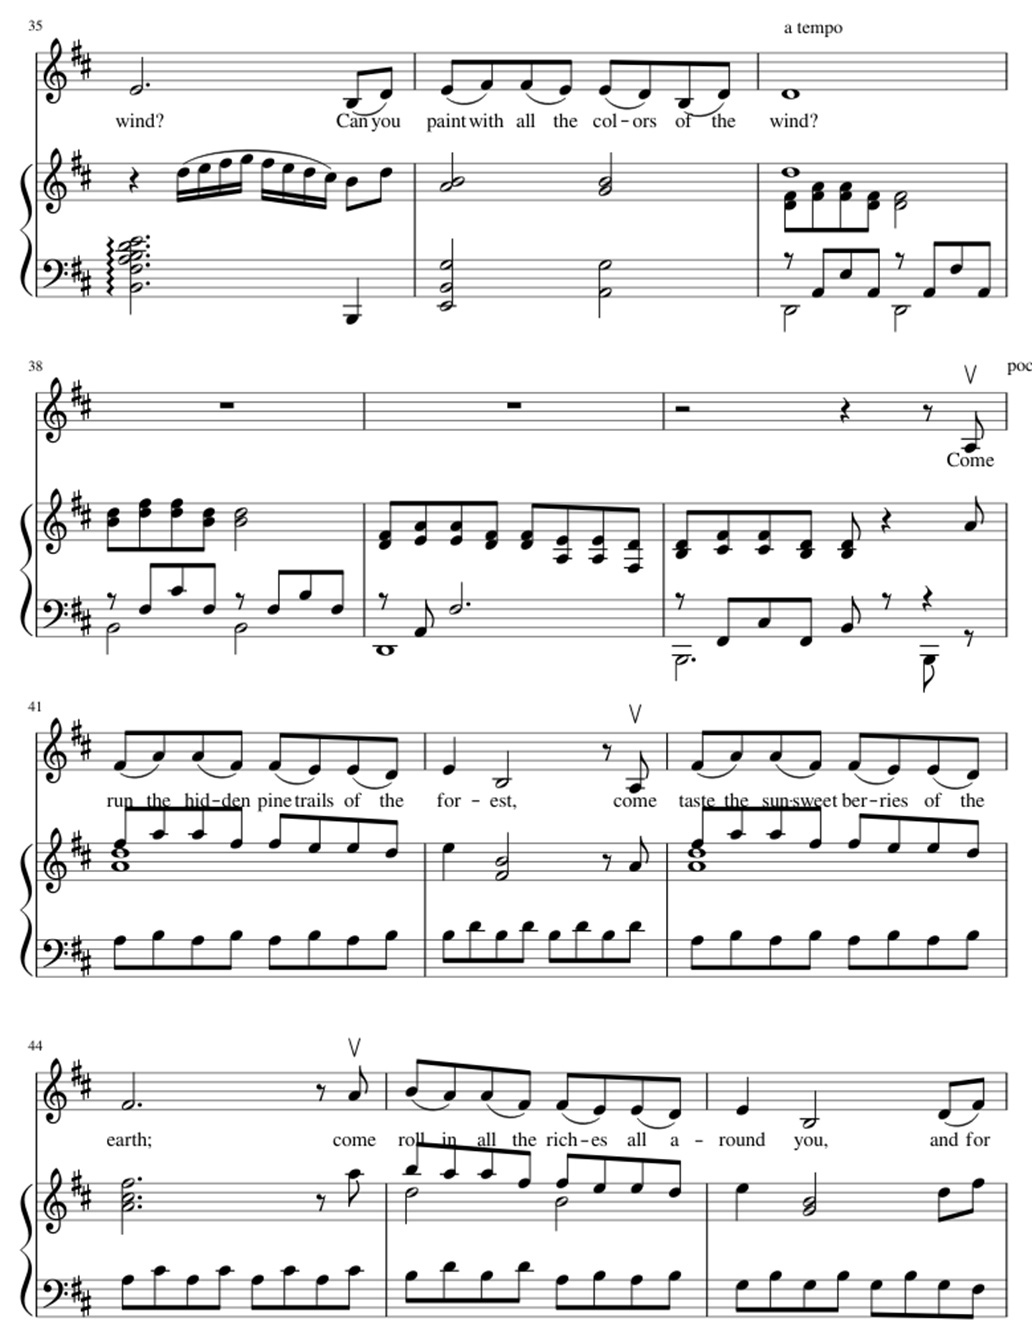 Color of the winds sheet music notes 4